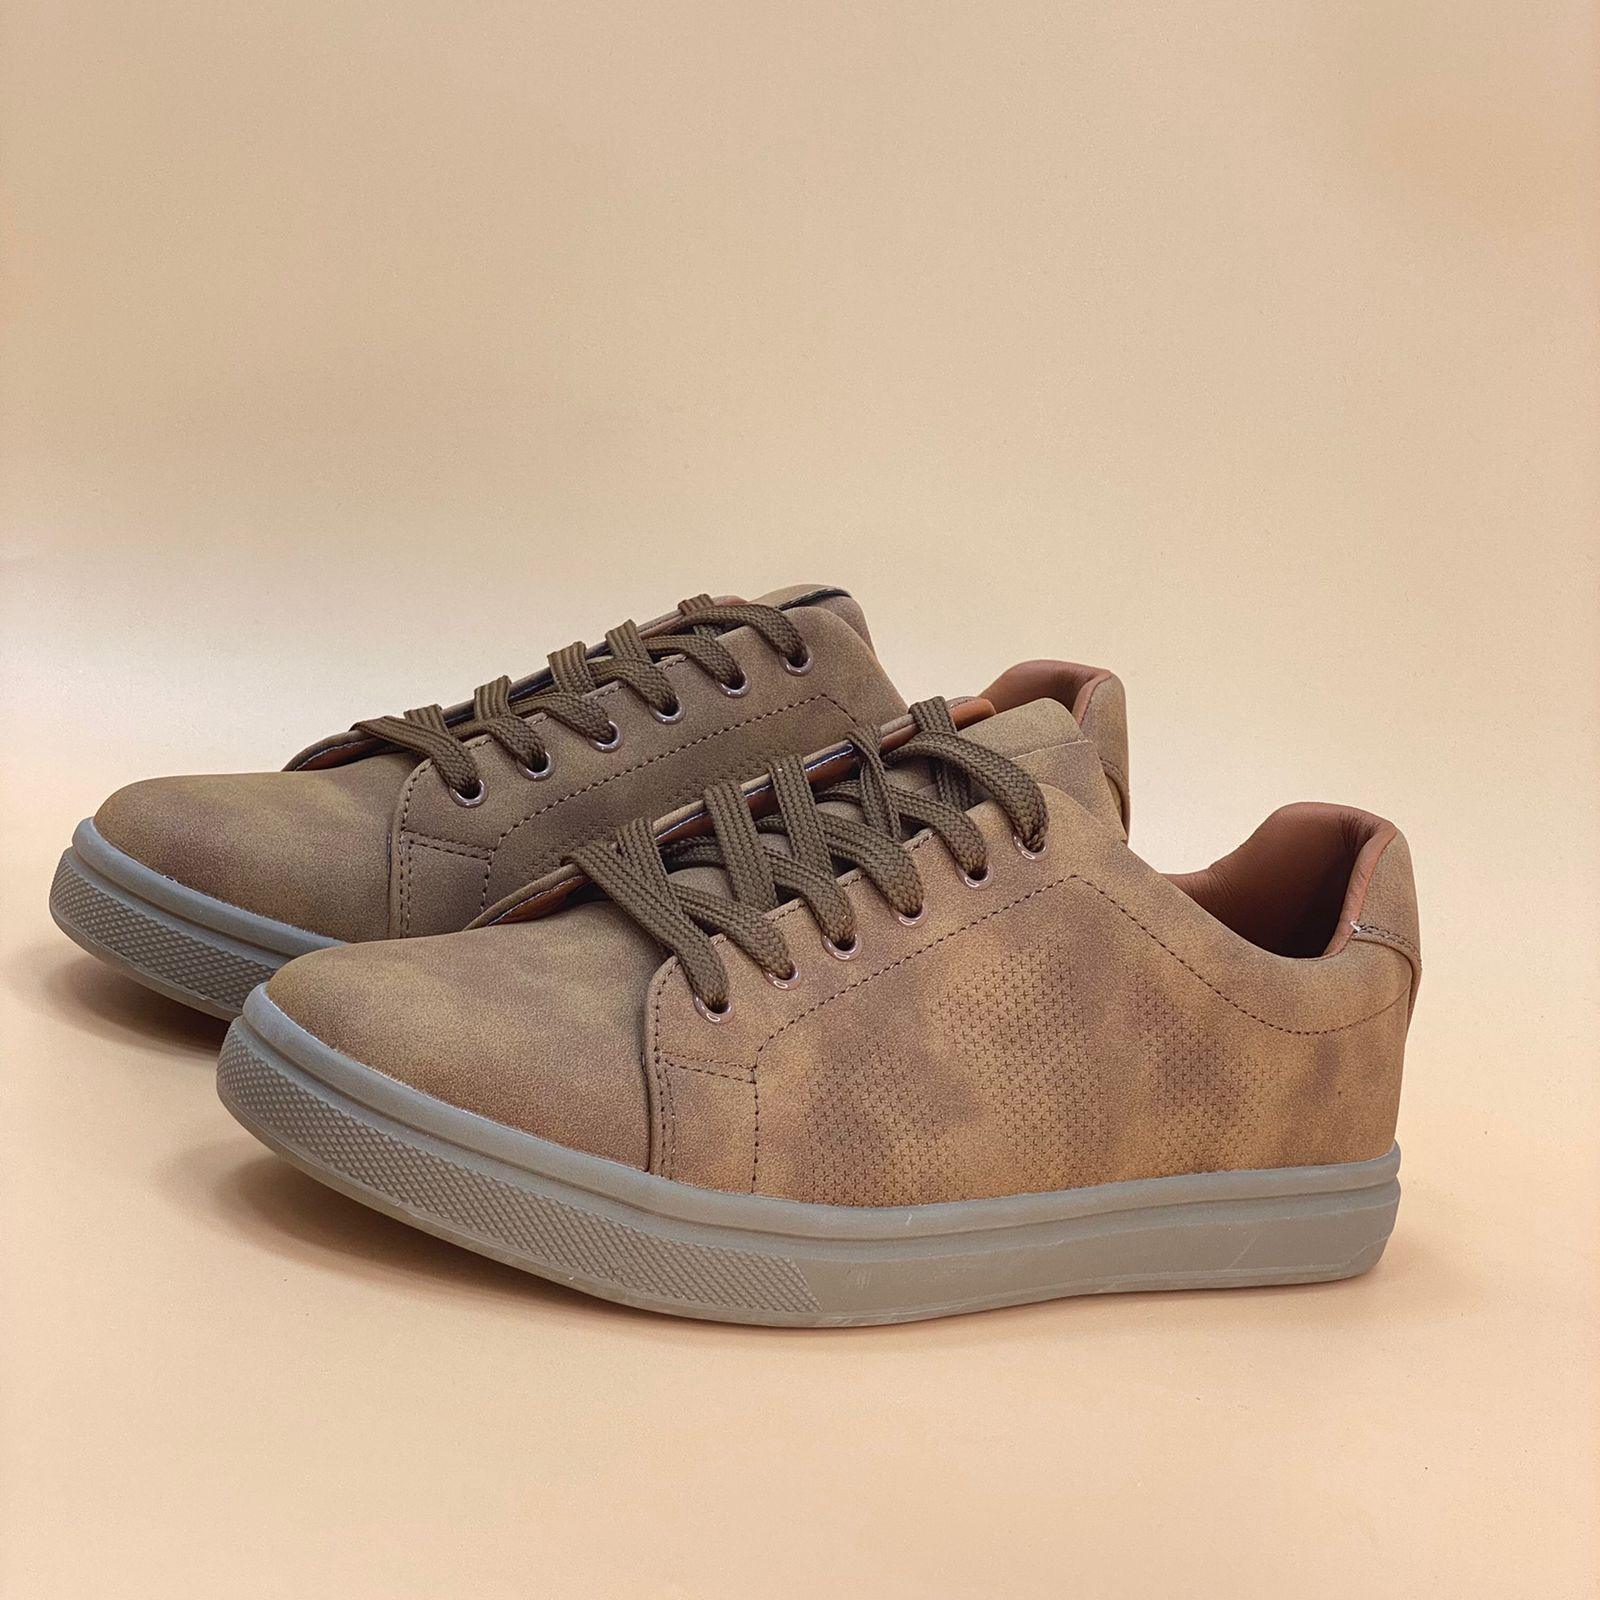 MEN SHOES  M133, MADE IN CHINA - Olive Tree Shoes 